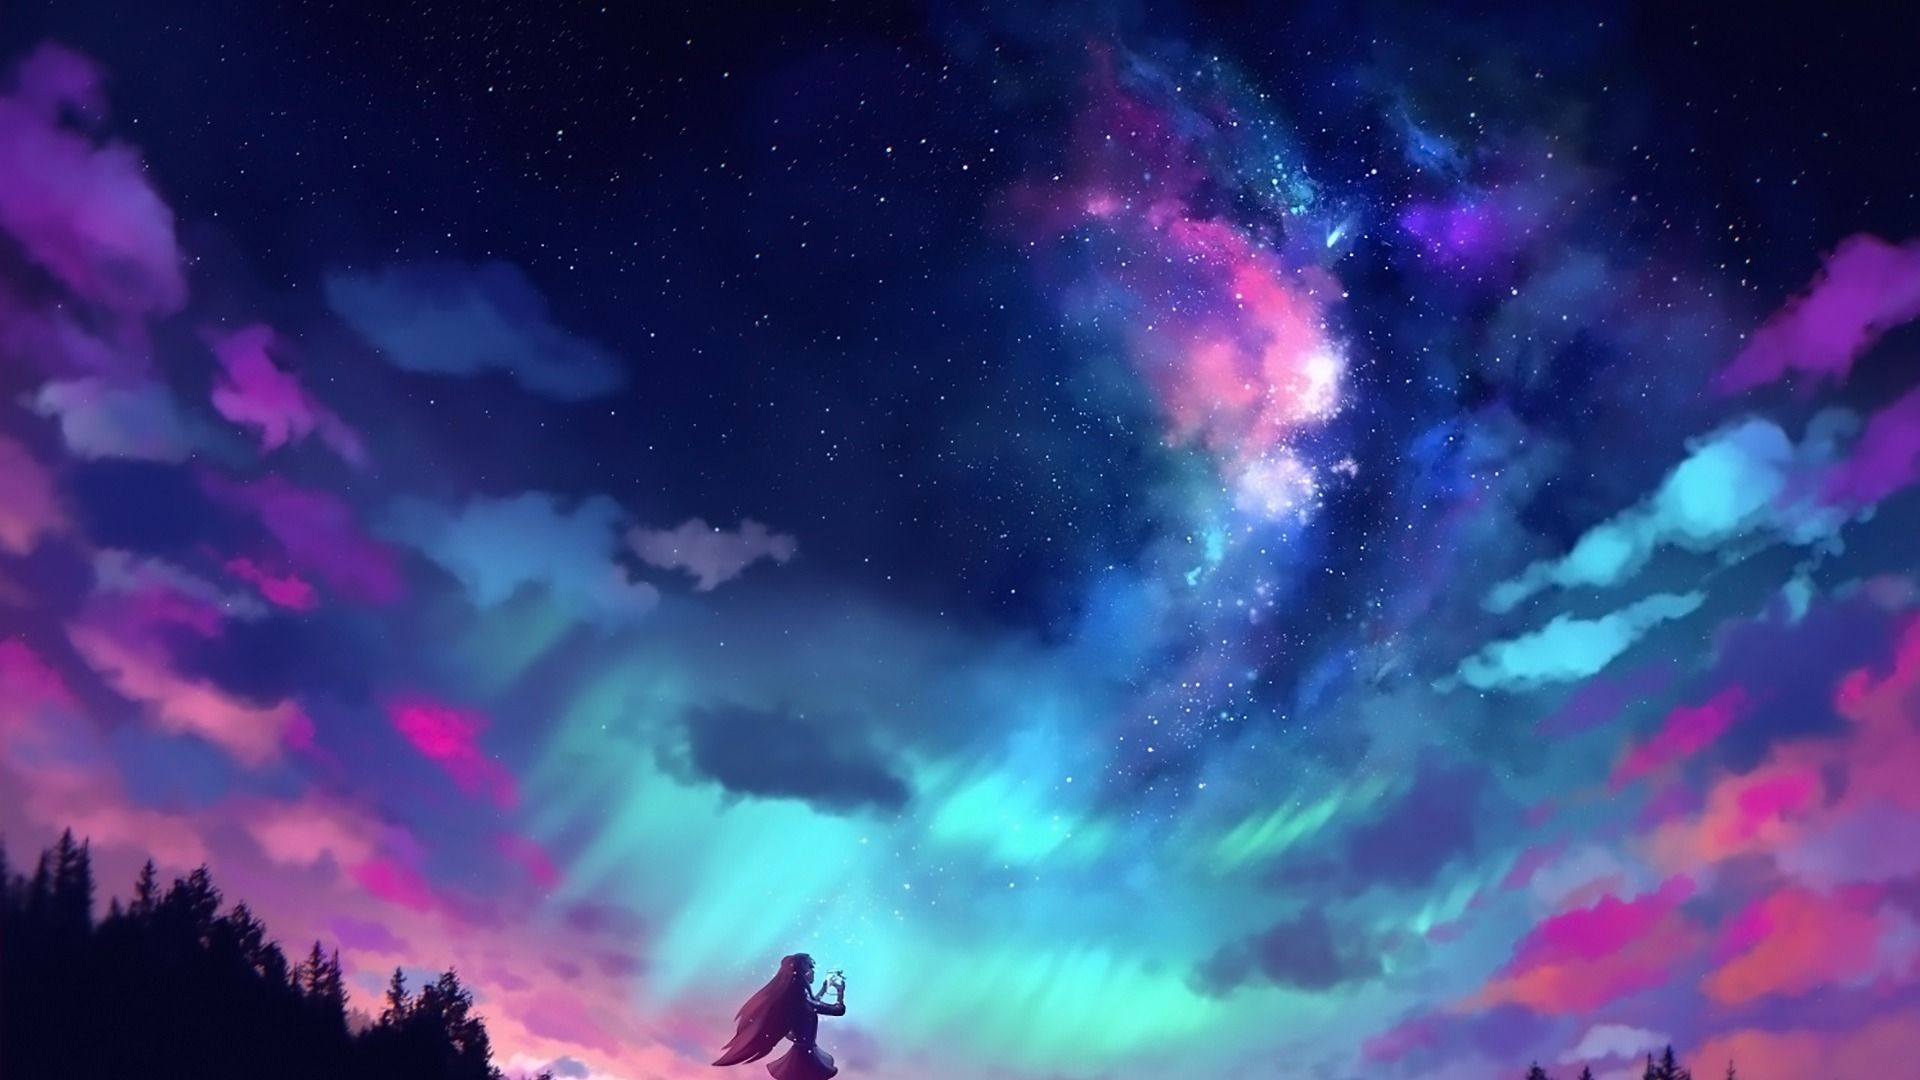 Anime Girl And Colorful Sky 1080P Laptop Full HD Wallpaper, HD Anime 4K Wallpaper, Image, Photo and Background